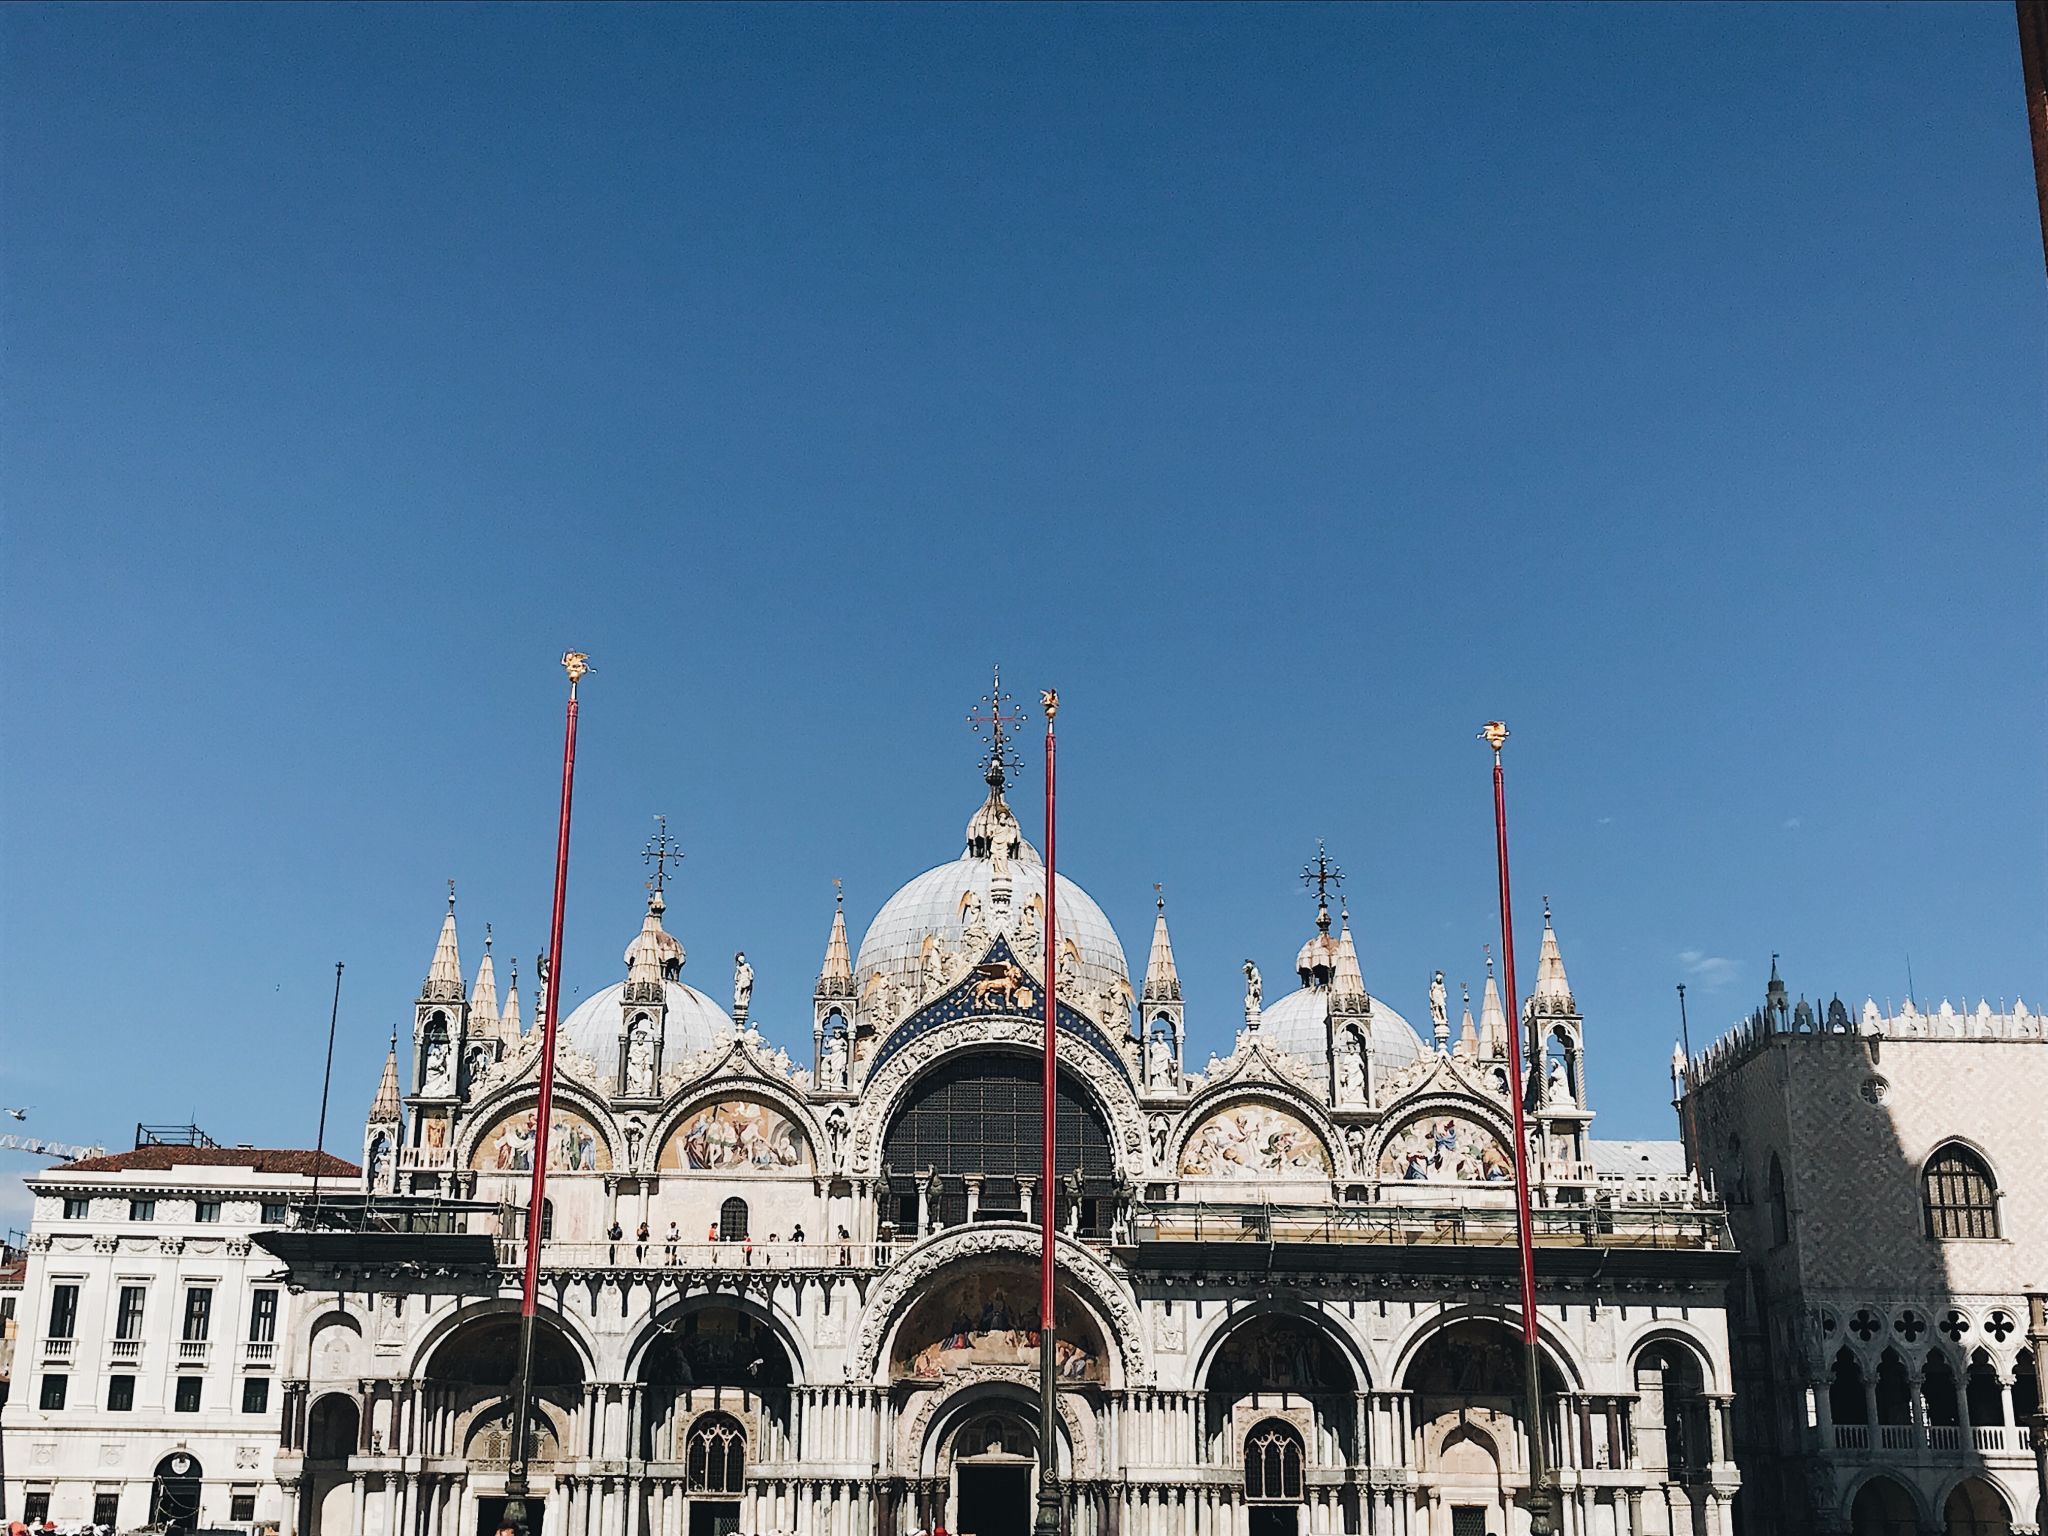 things to see in venice - St Marks Basilica